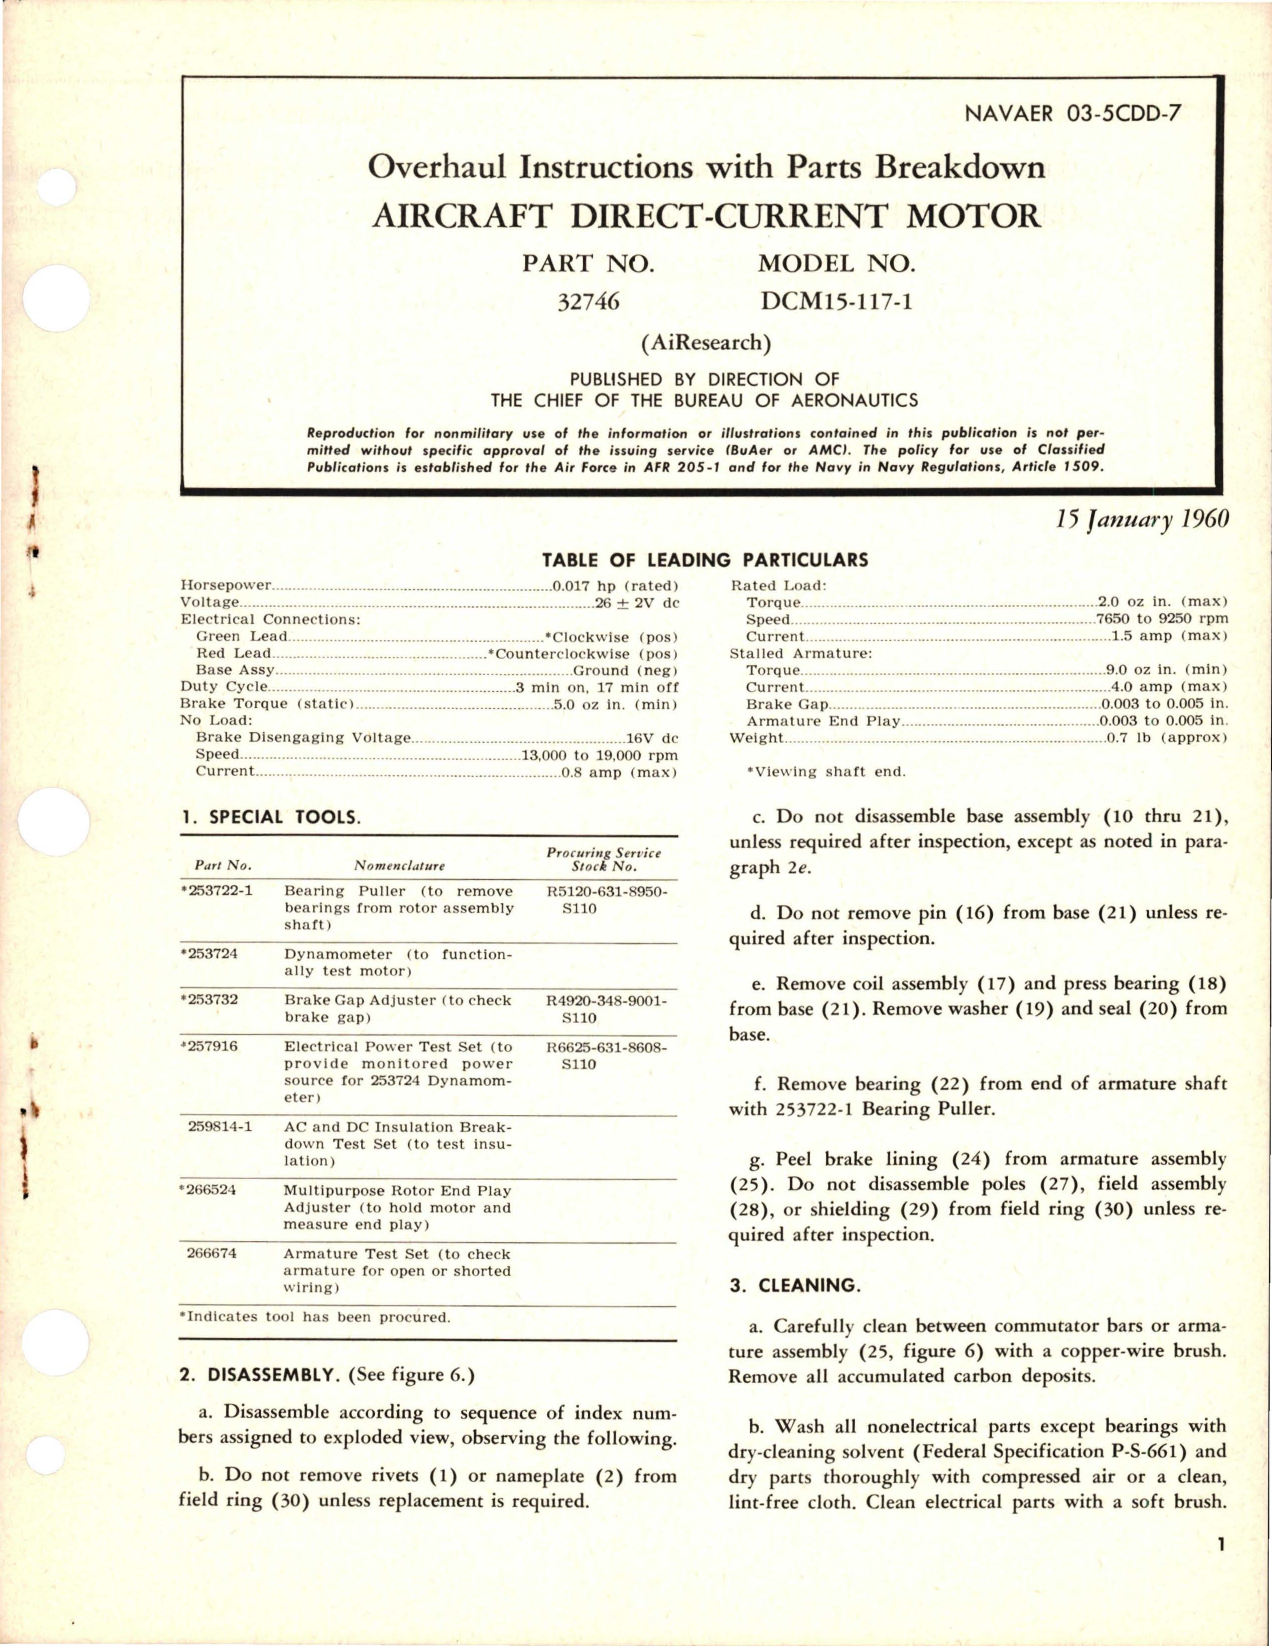 Sample page 1 from AirCorps Library document: Overhaul Instructions with Parts Breakdown for Direct Current Motor - Part 32746 - Model DCM15-117-1